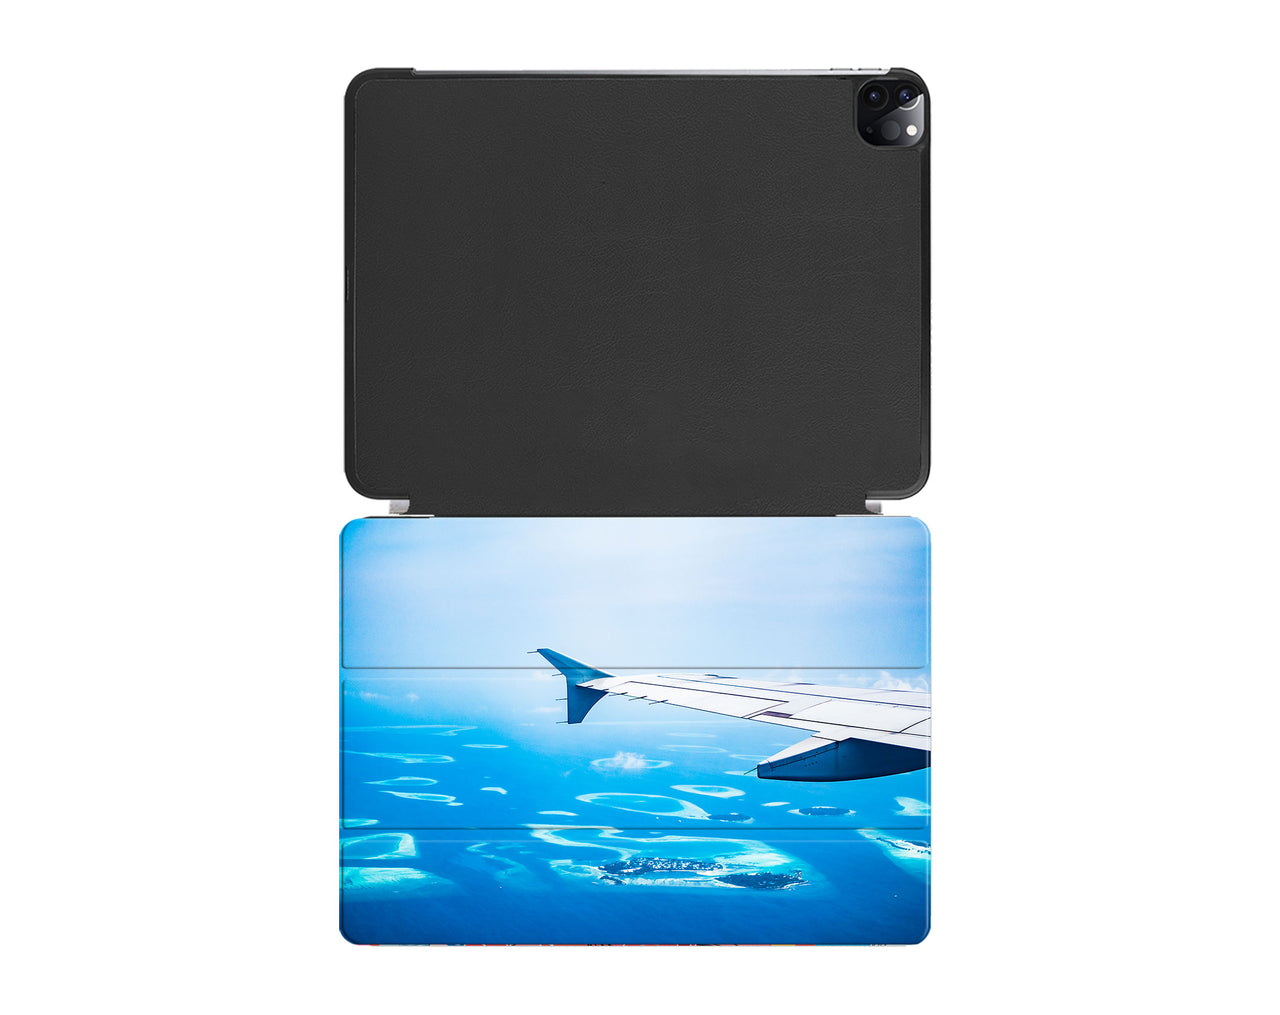 Outstanding View Through Airplane Wing Designed iPad Cases